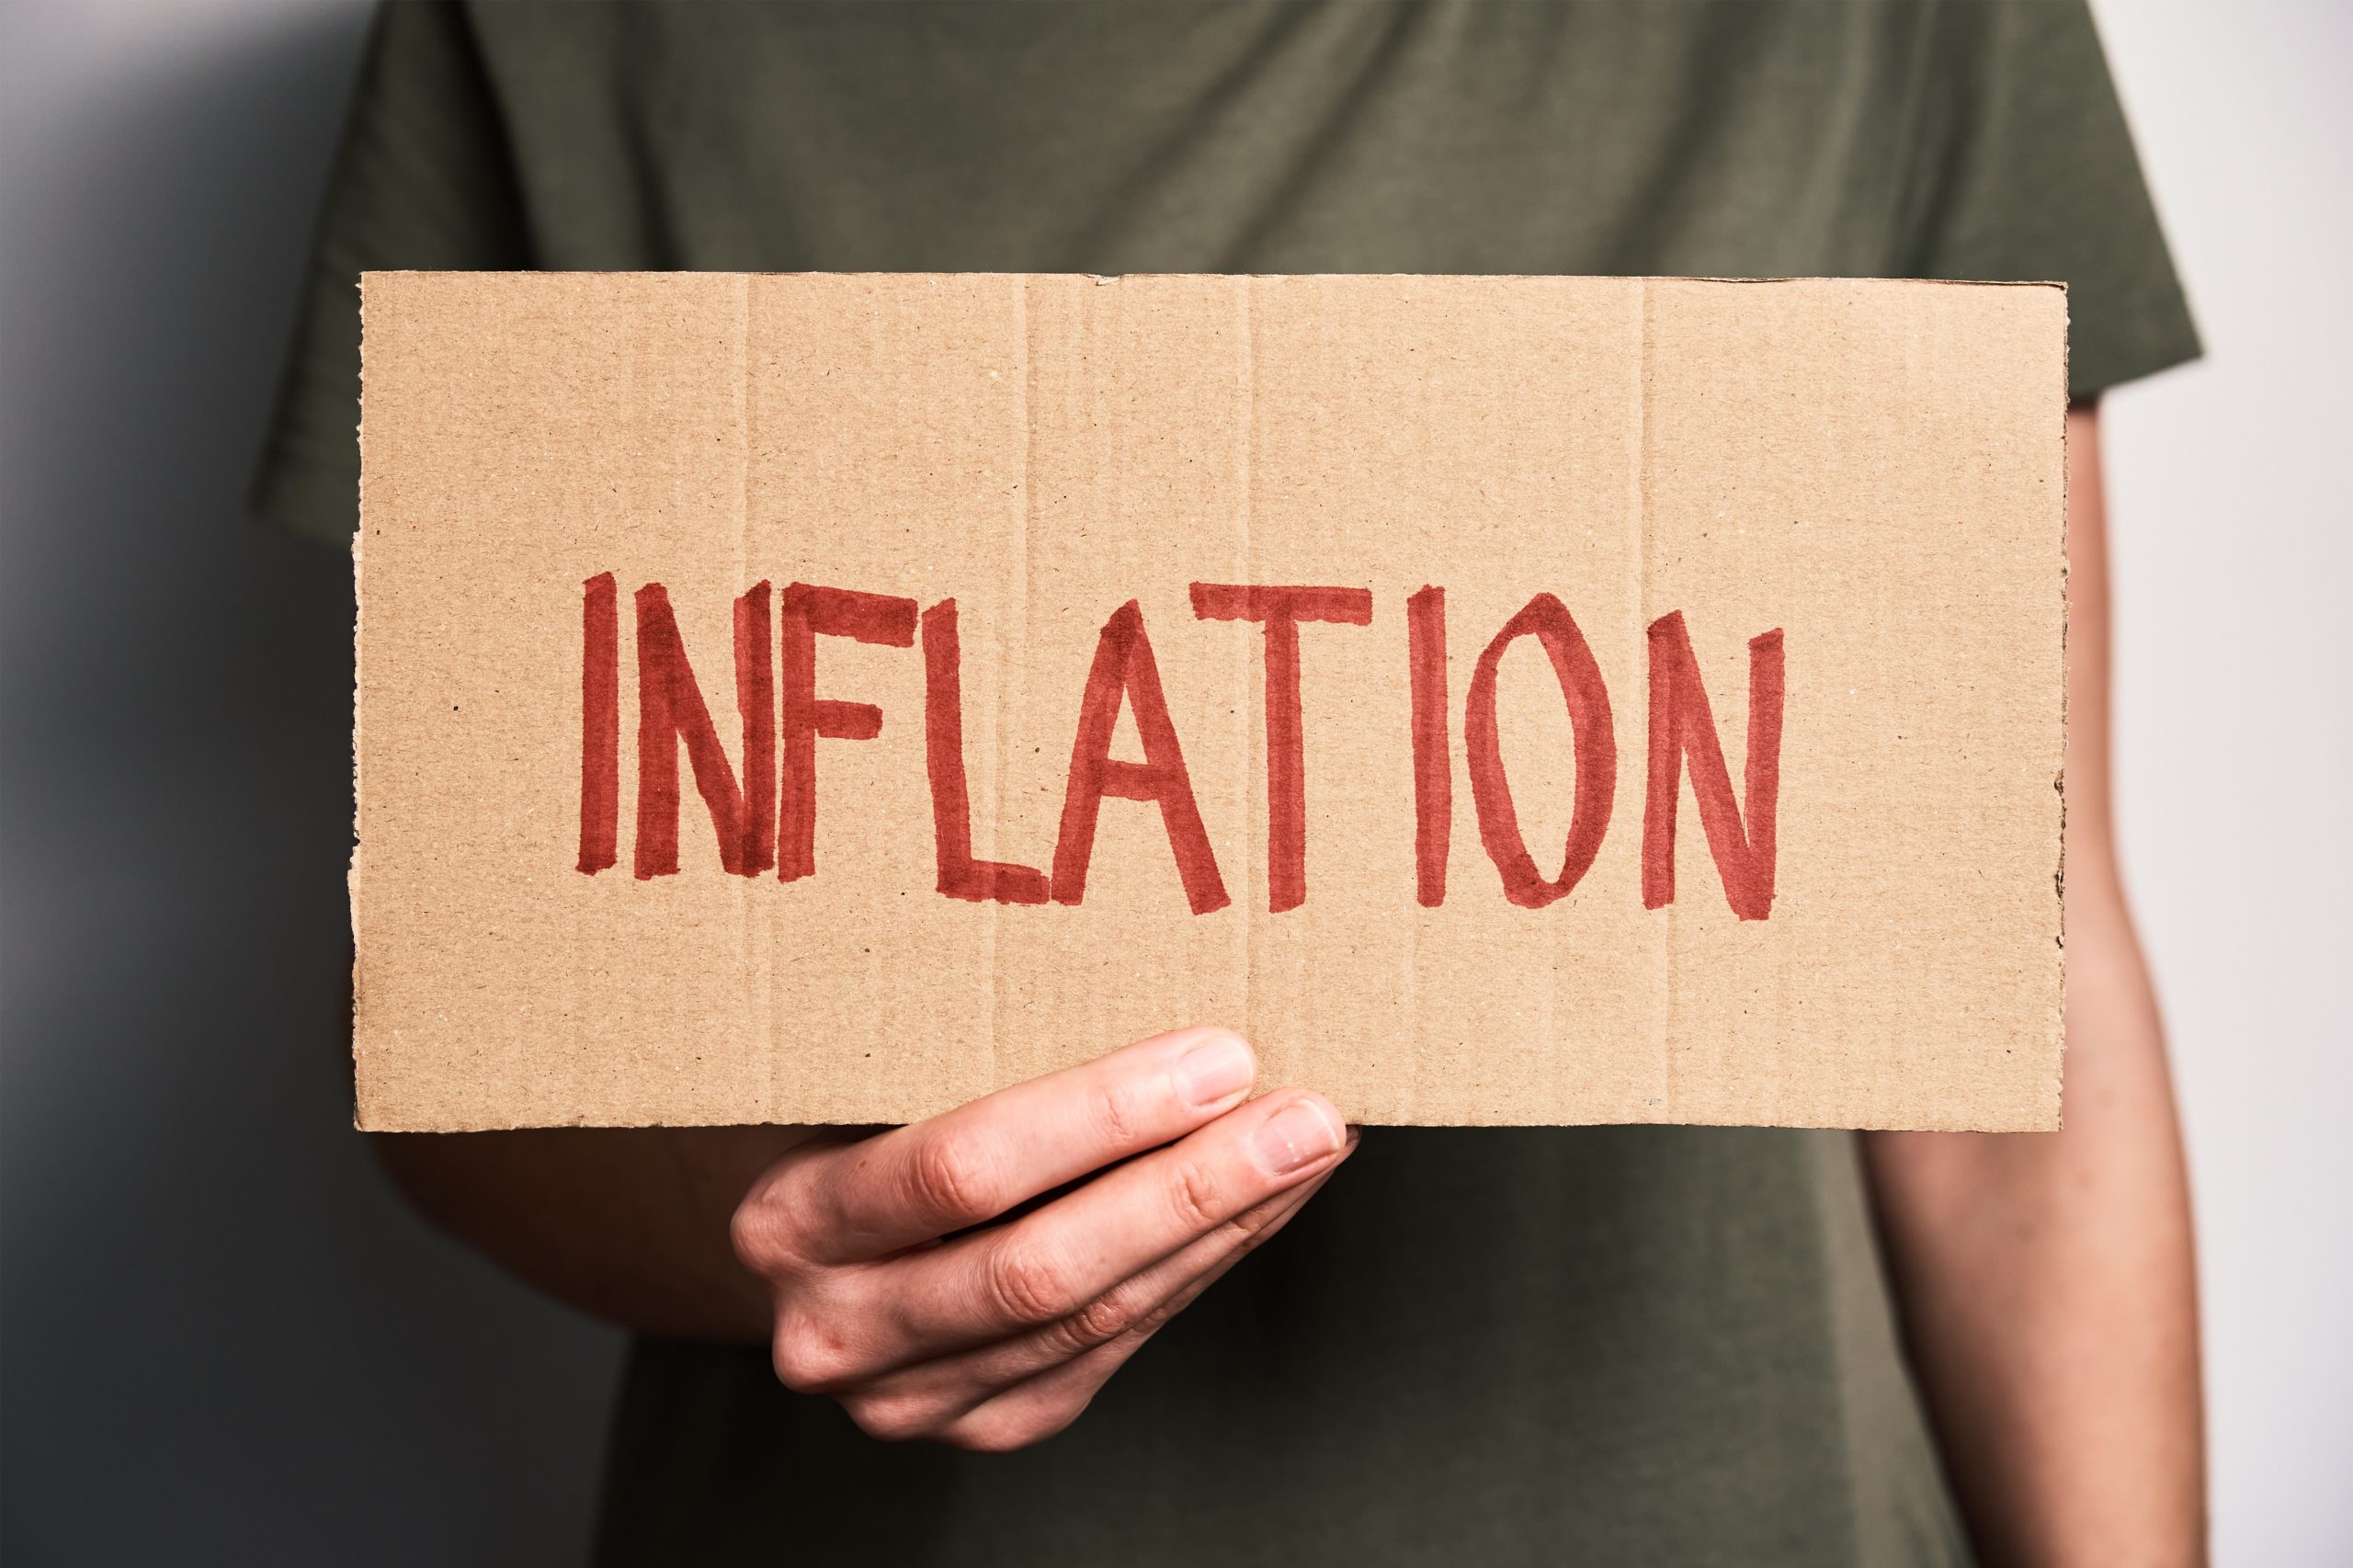 Inflation hits 40-year high of 9.1% amid cost-of-living crisis